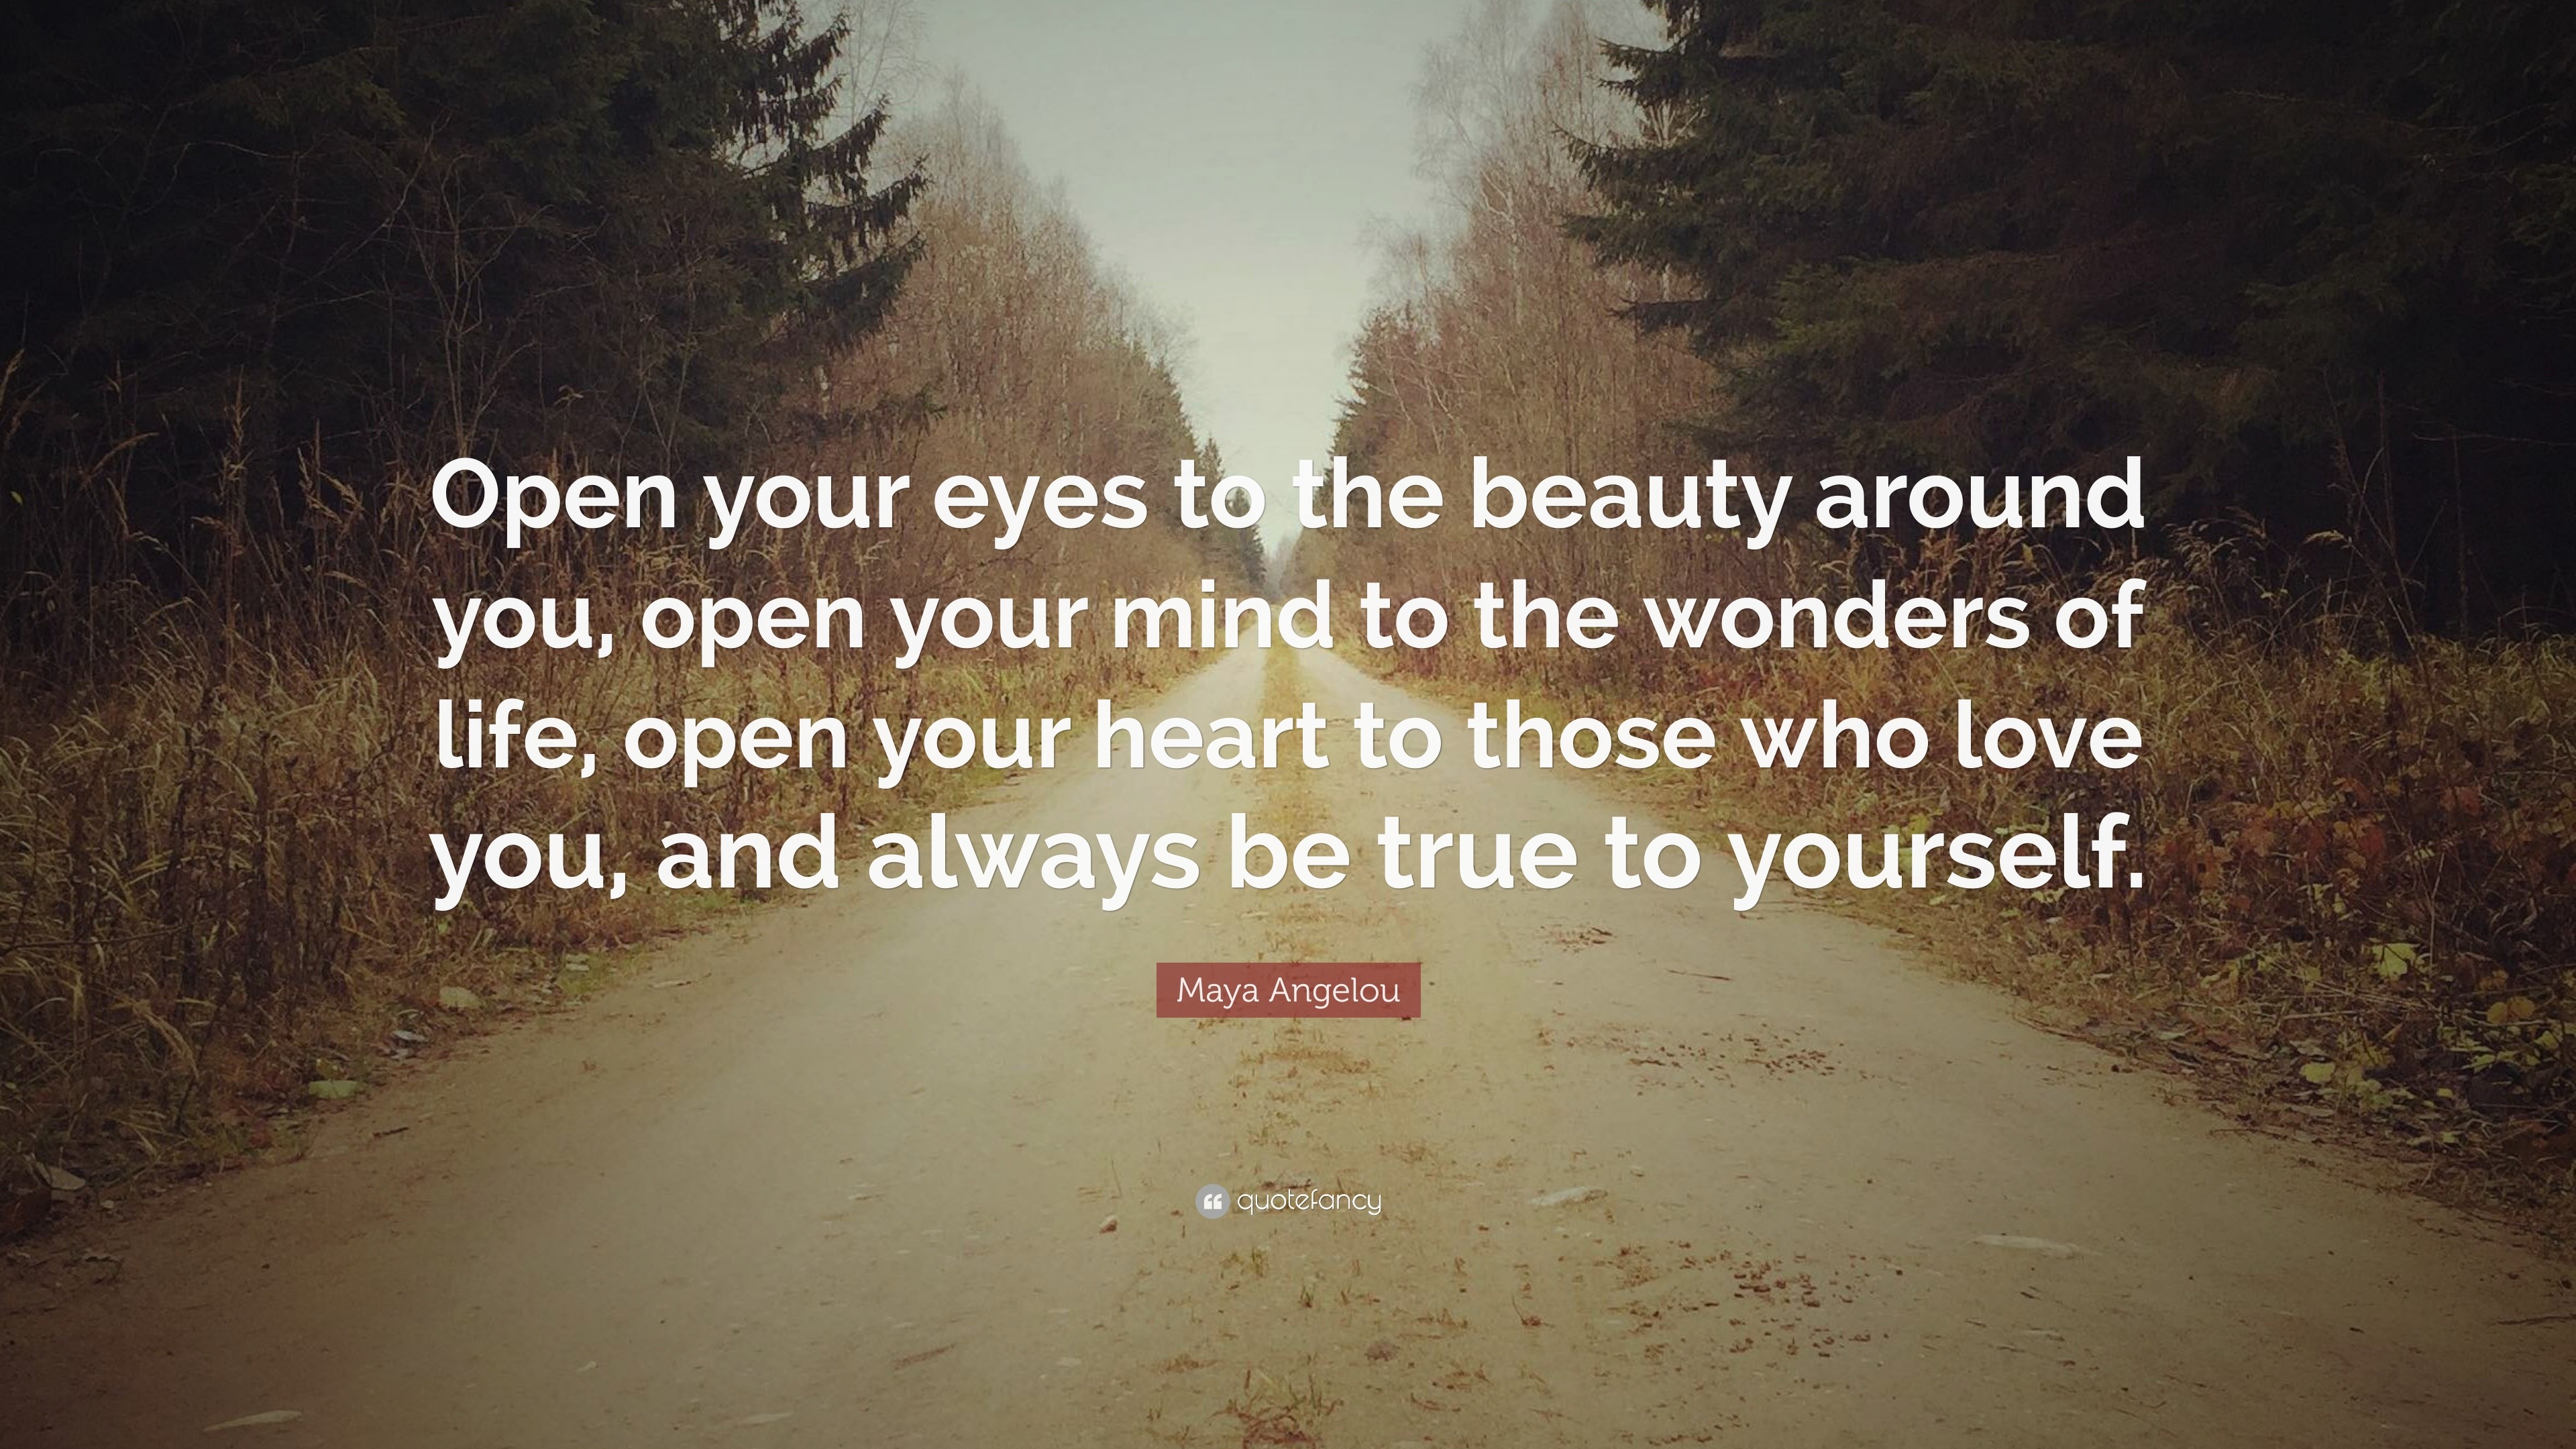 Maya Angelou Quote: “Open your eyes to the beauty around you, open your ...